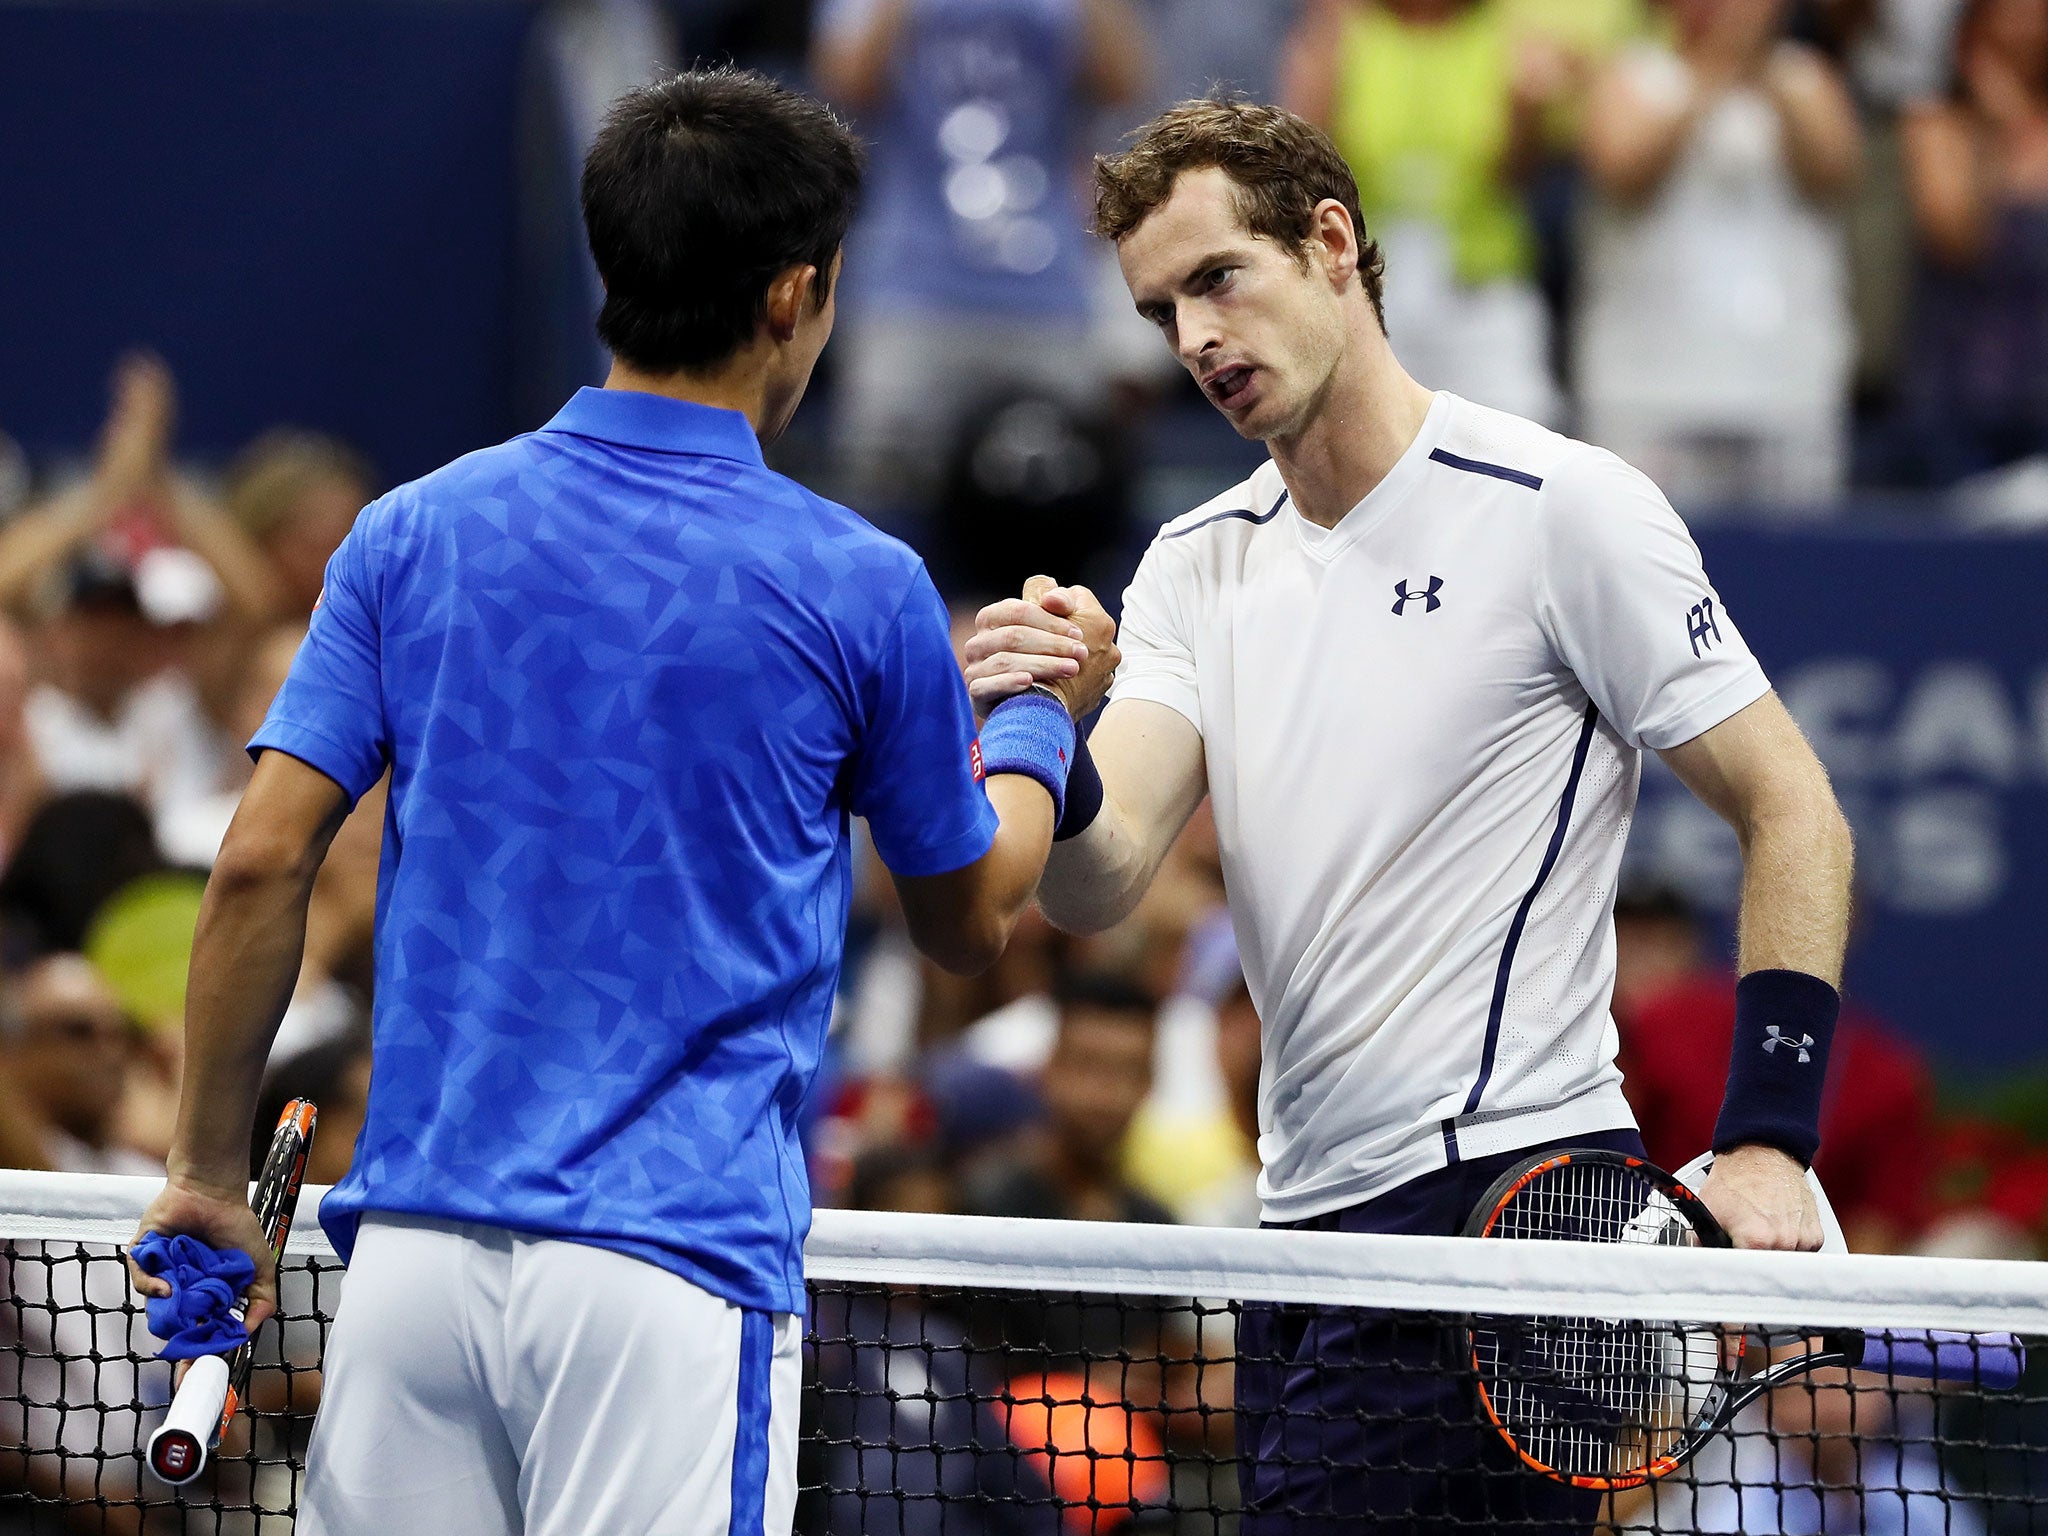 Kei Nishikori beat Andy Murray at the US Open earlier this year